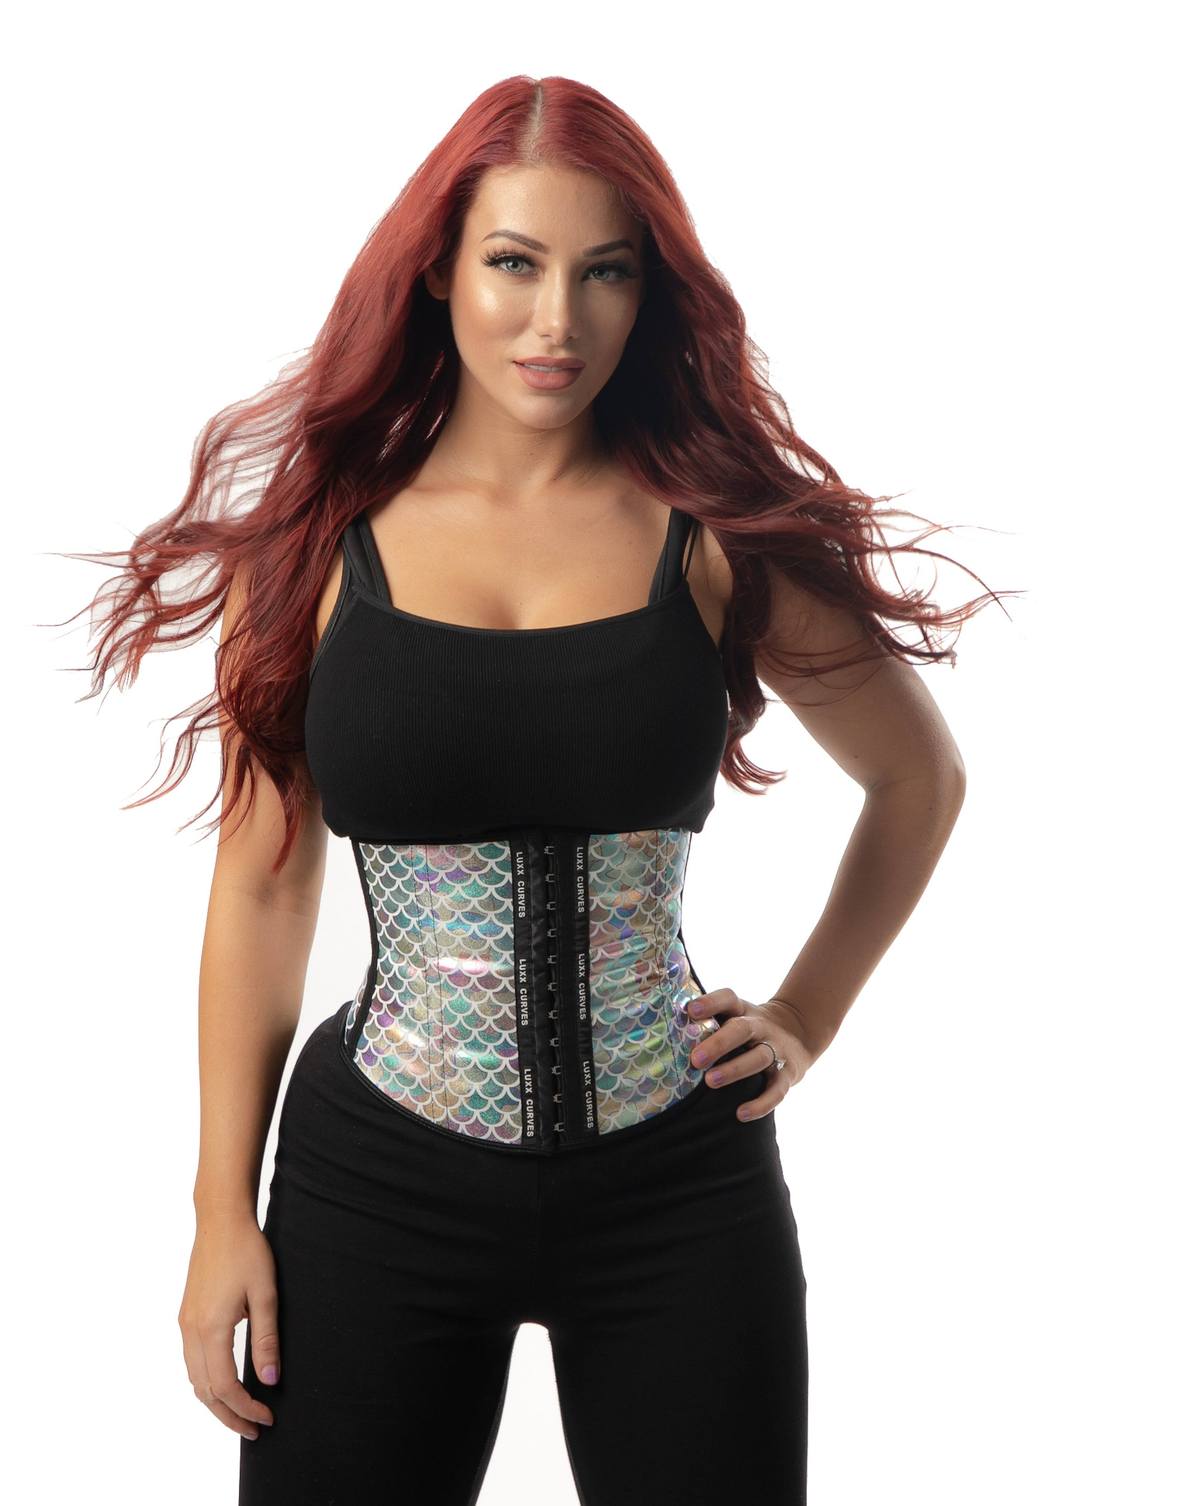 Ultimate Work out long torso Waist Trainer #2024